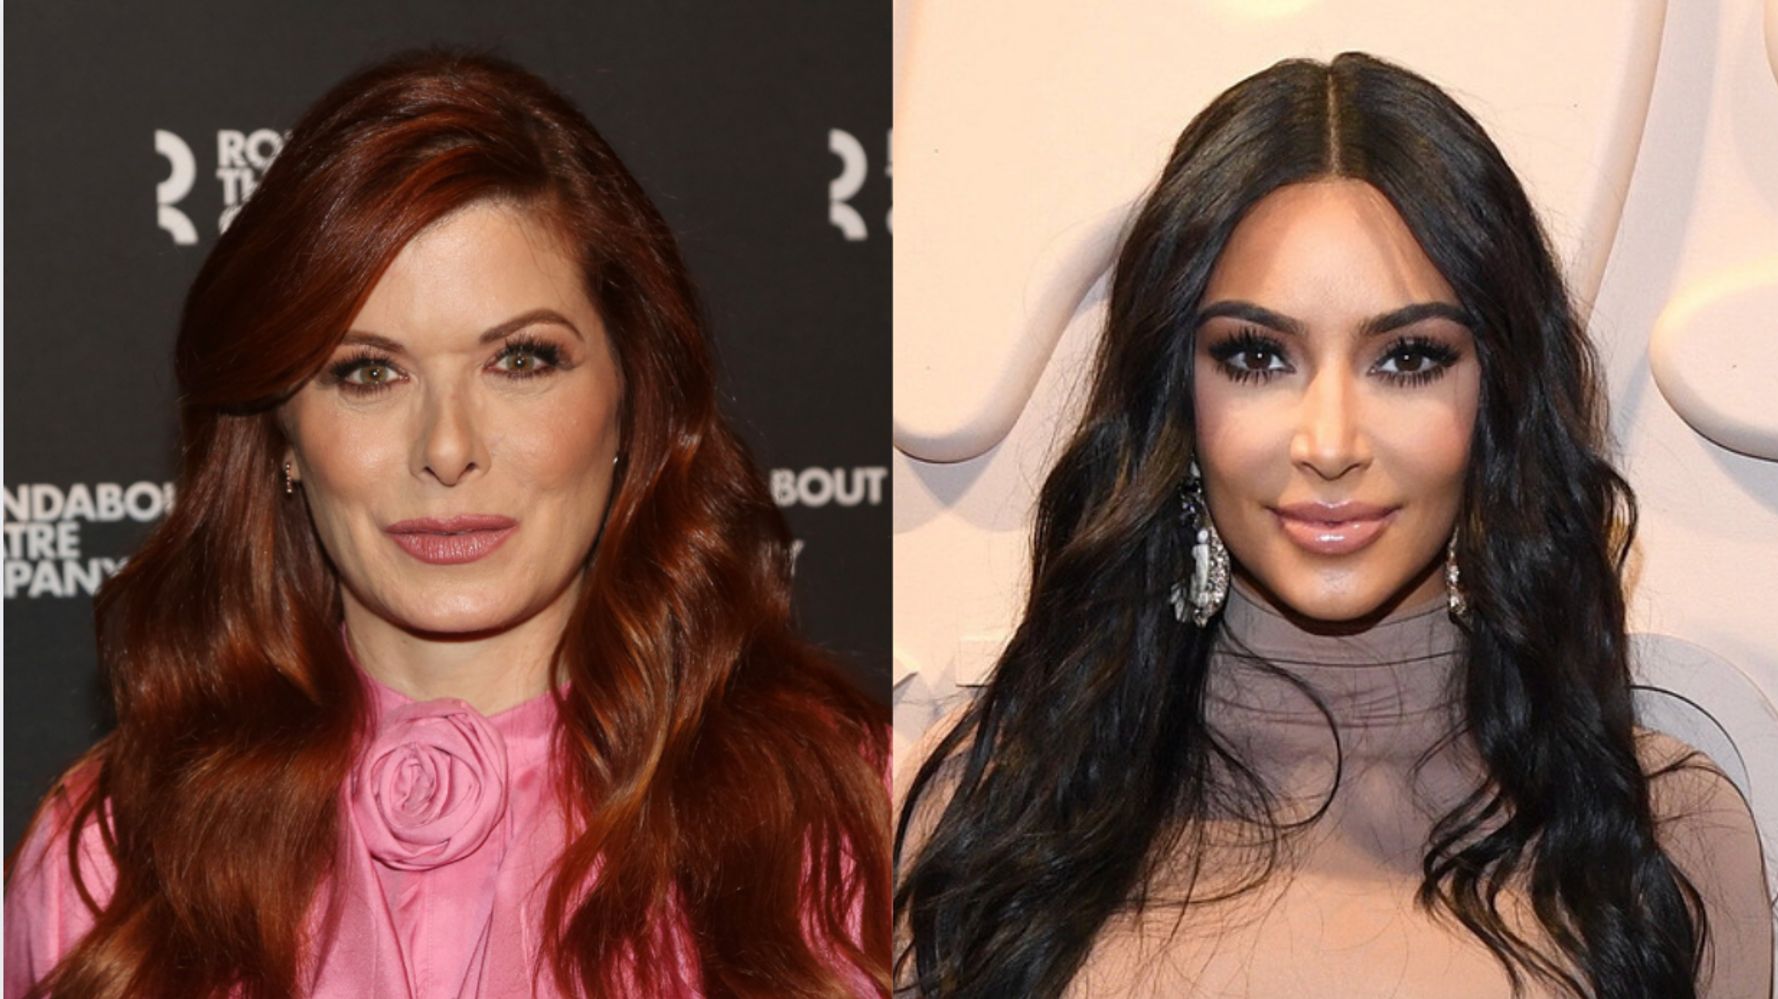 Debra Messing Questions Why Kim Kardashian Is Hosting 'SNL' And She Won't Like The Answer